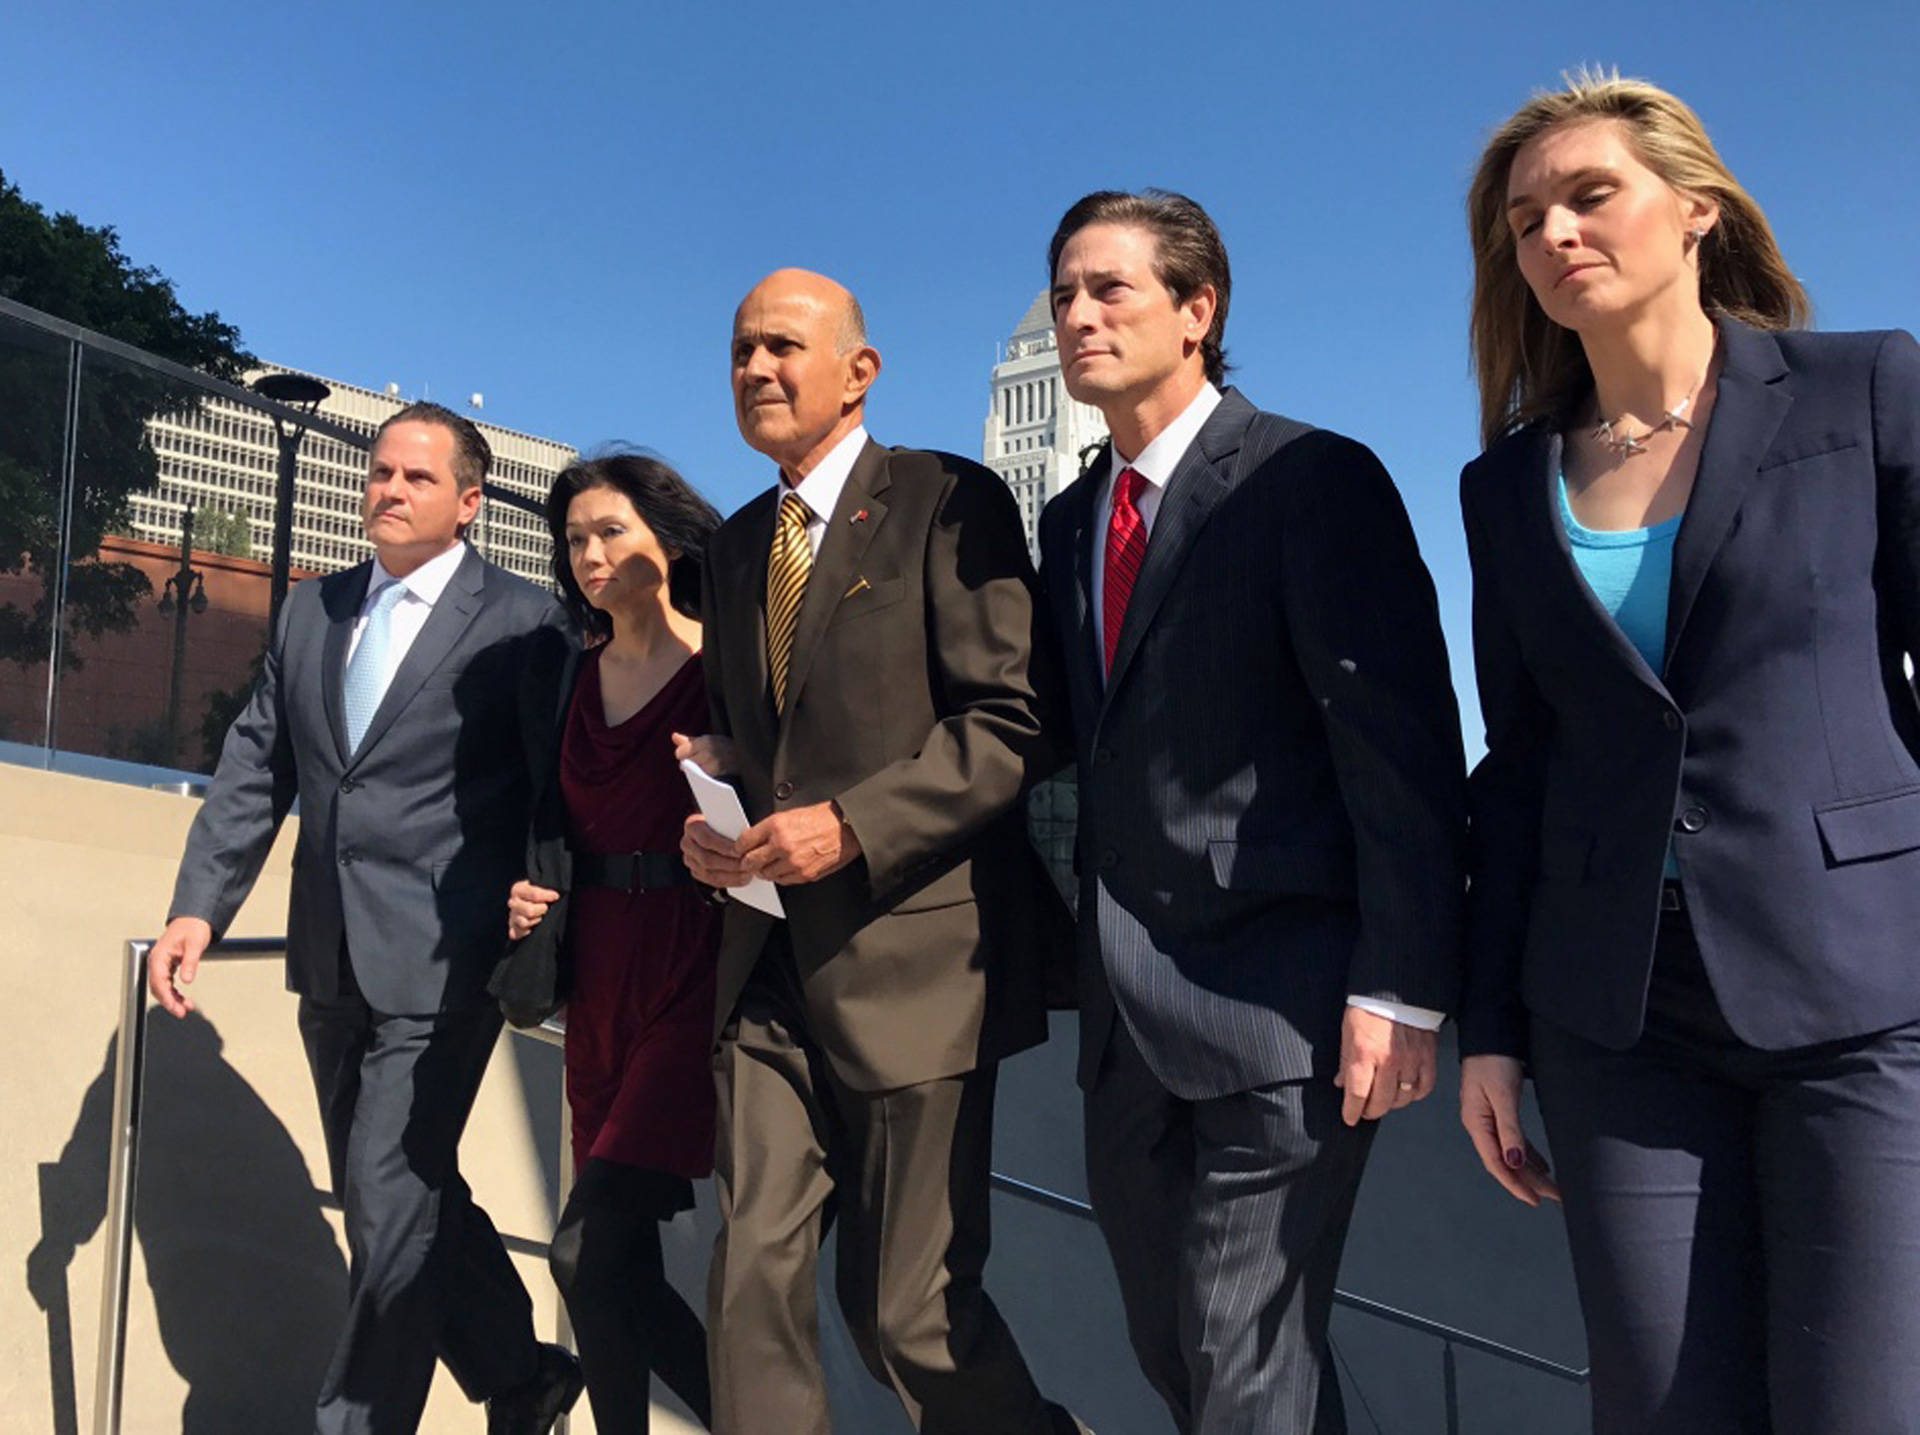 Former L.A. County Sheriff Lee Baca (C) leaves the federal courthouse after being convicted of lying, conspiracy and obstructing an FBI investigation into inmate abuse in the jails. Annie Gilbertson/KPCC